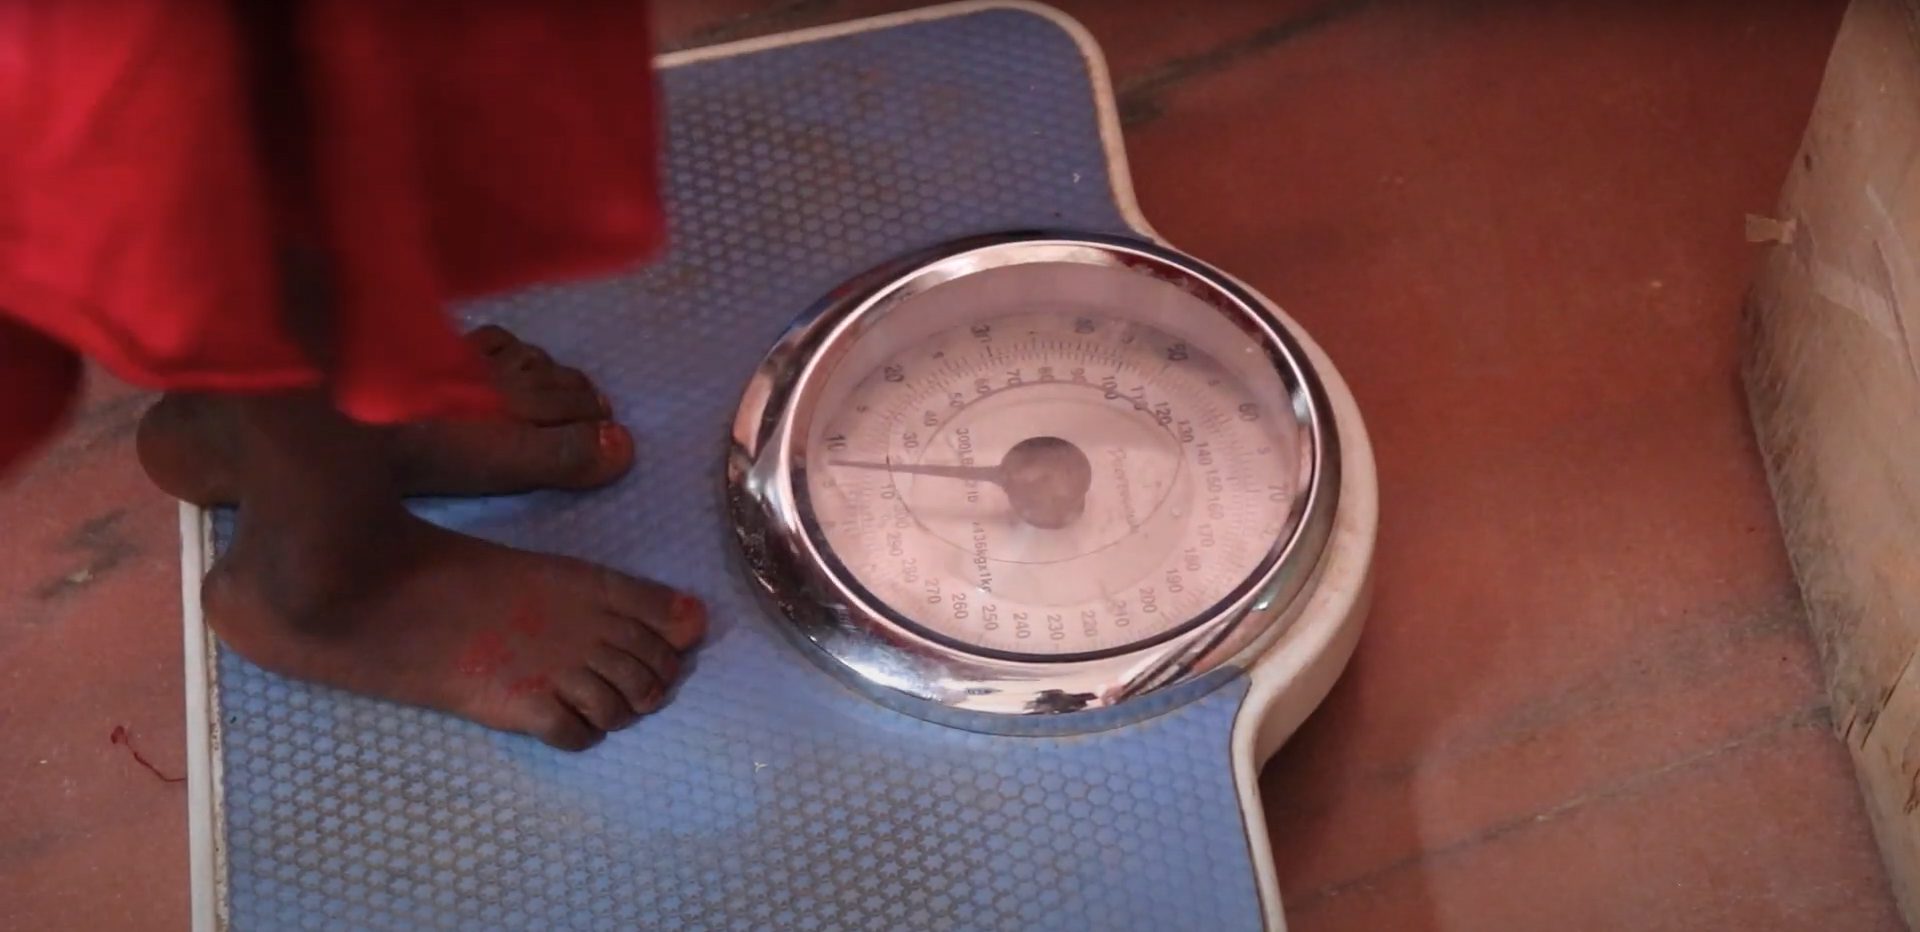 A child's feet standing on top of a scale